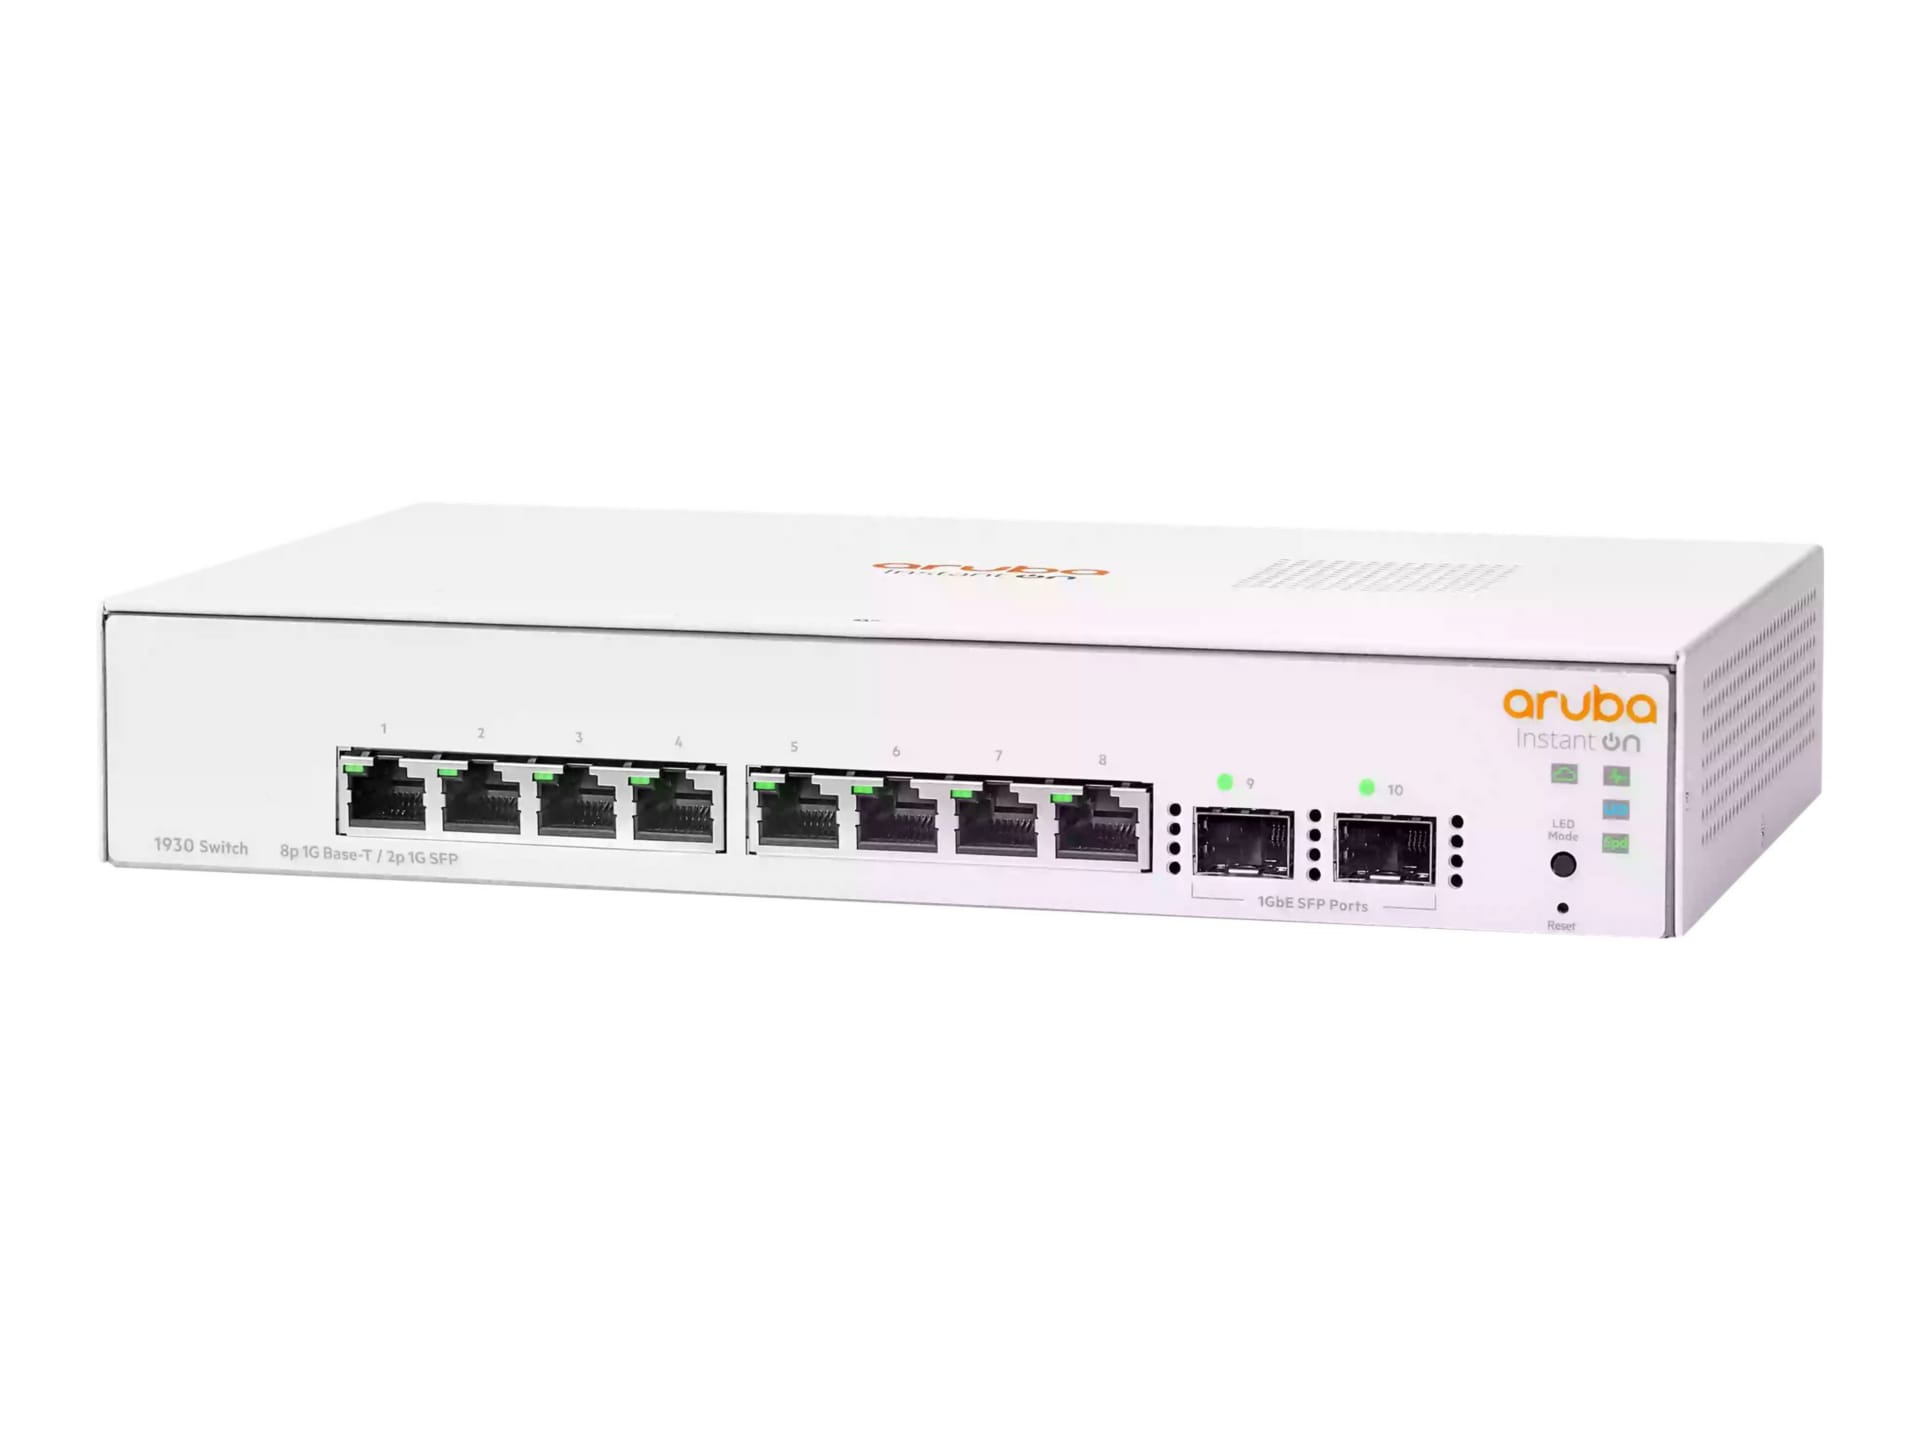 HPE Aruba Instant On 1930 8G 2SFP Switch - switch - 10 ports - managed